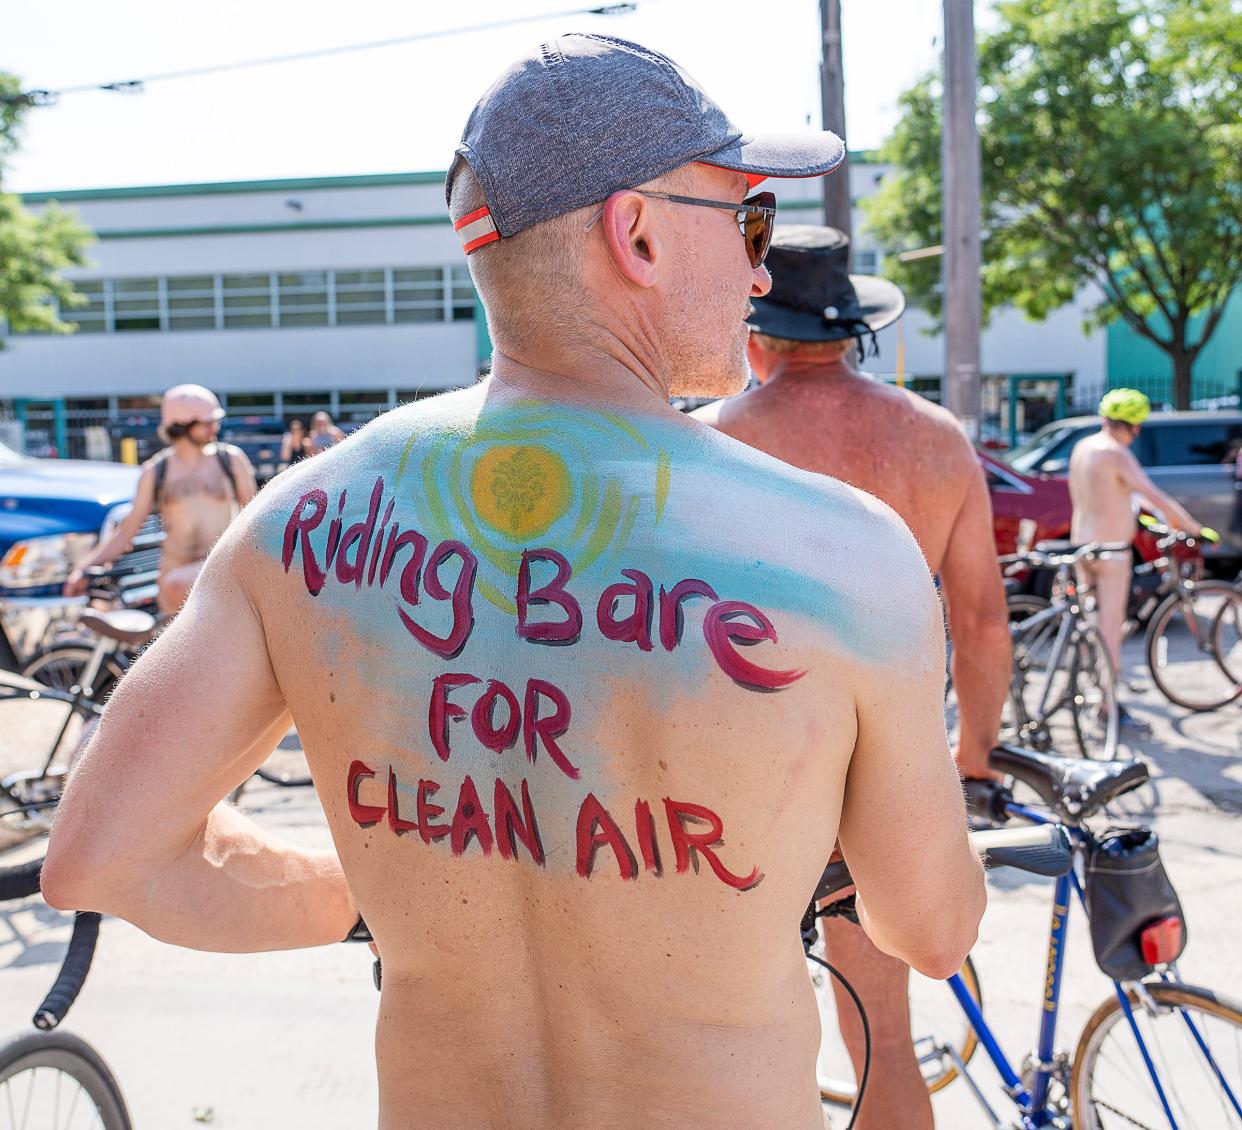 Paul Grunwald of Chicago prepares for the World Naked Bike Ride, a 15 mile route starting at Kochanski’s Concertina Beer Hall, in Milwaukee.